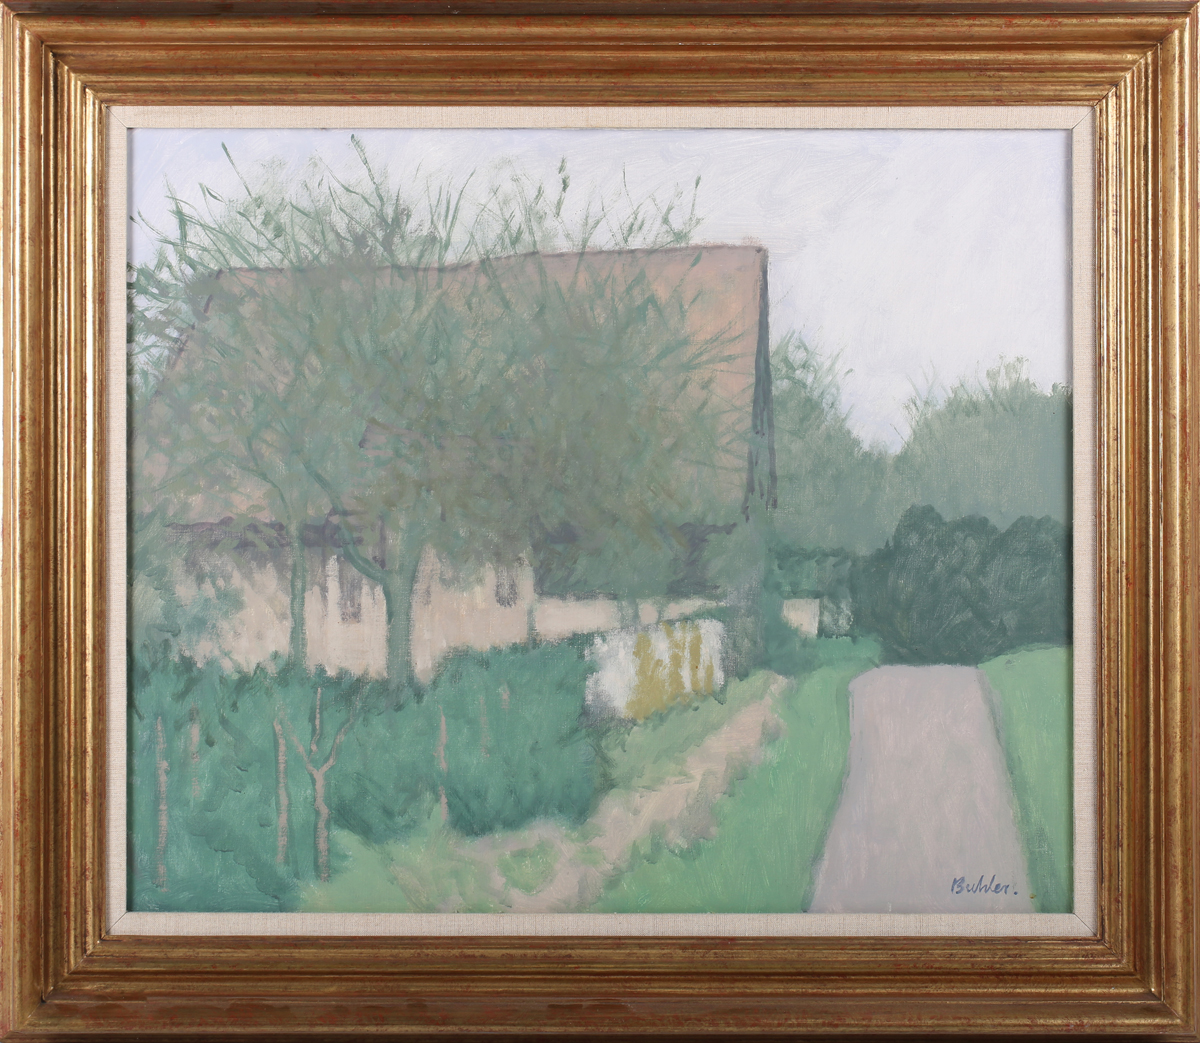 Robert Buhler - 'Bridge Farm, West Sussex', 20th century oil on canvas, signed recto, titled label